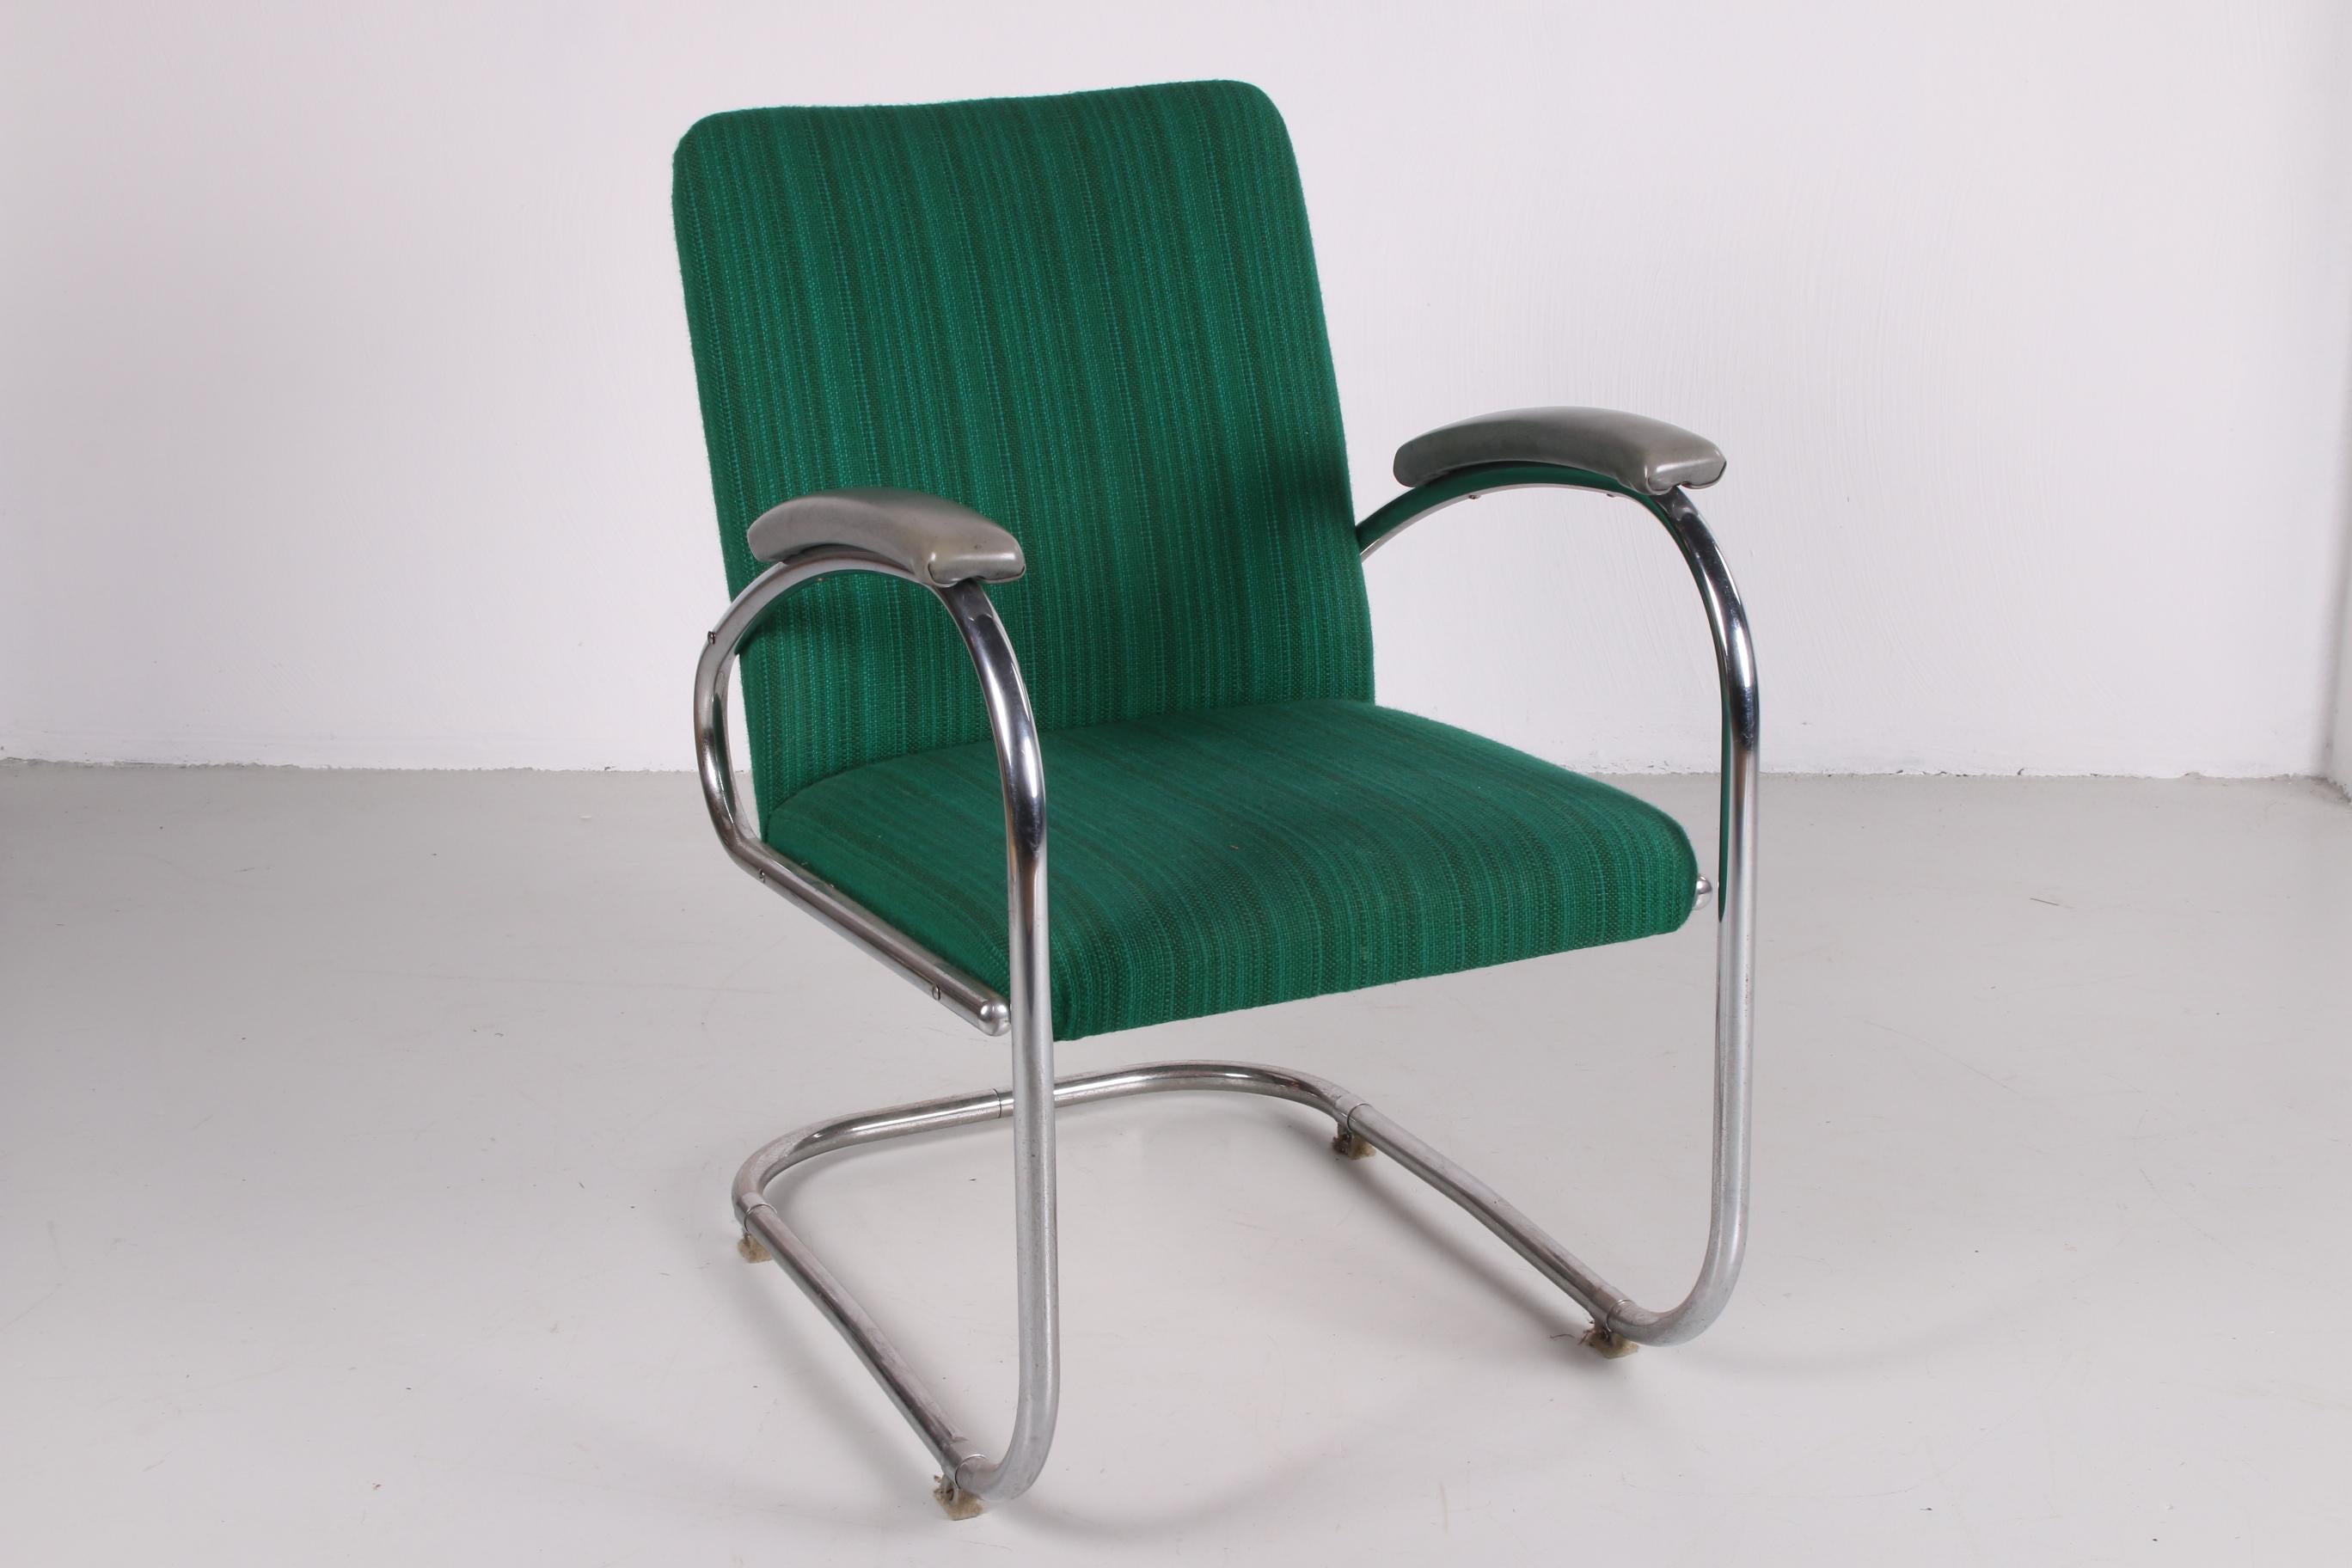 Mid-20th Century Bauhaus Armchairs Bridge with Table and Footstool Made by Mauser, Germany